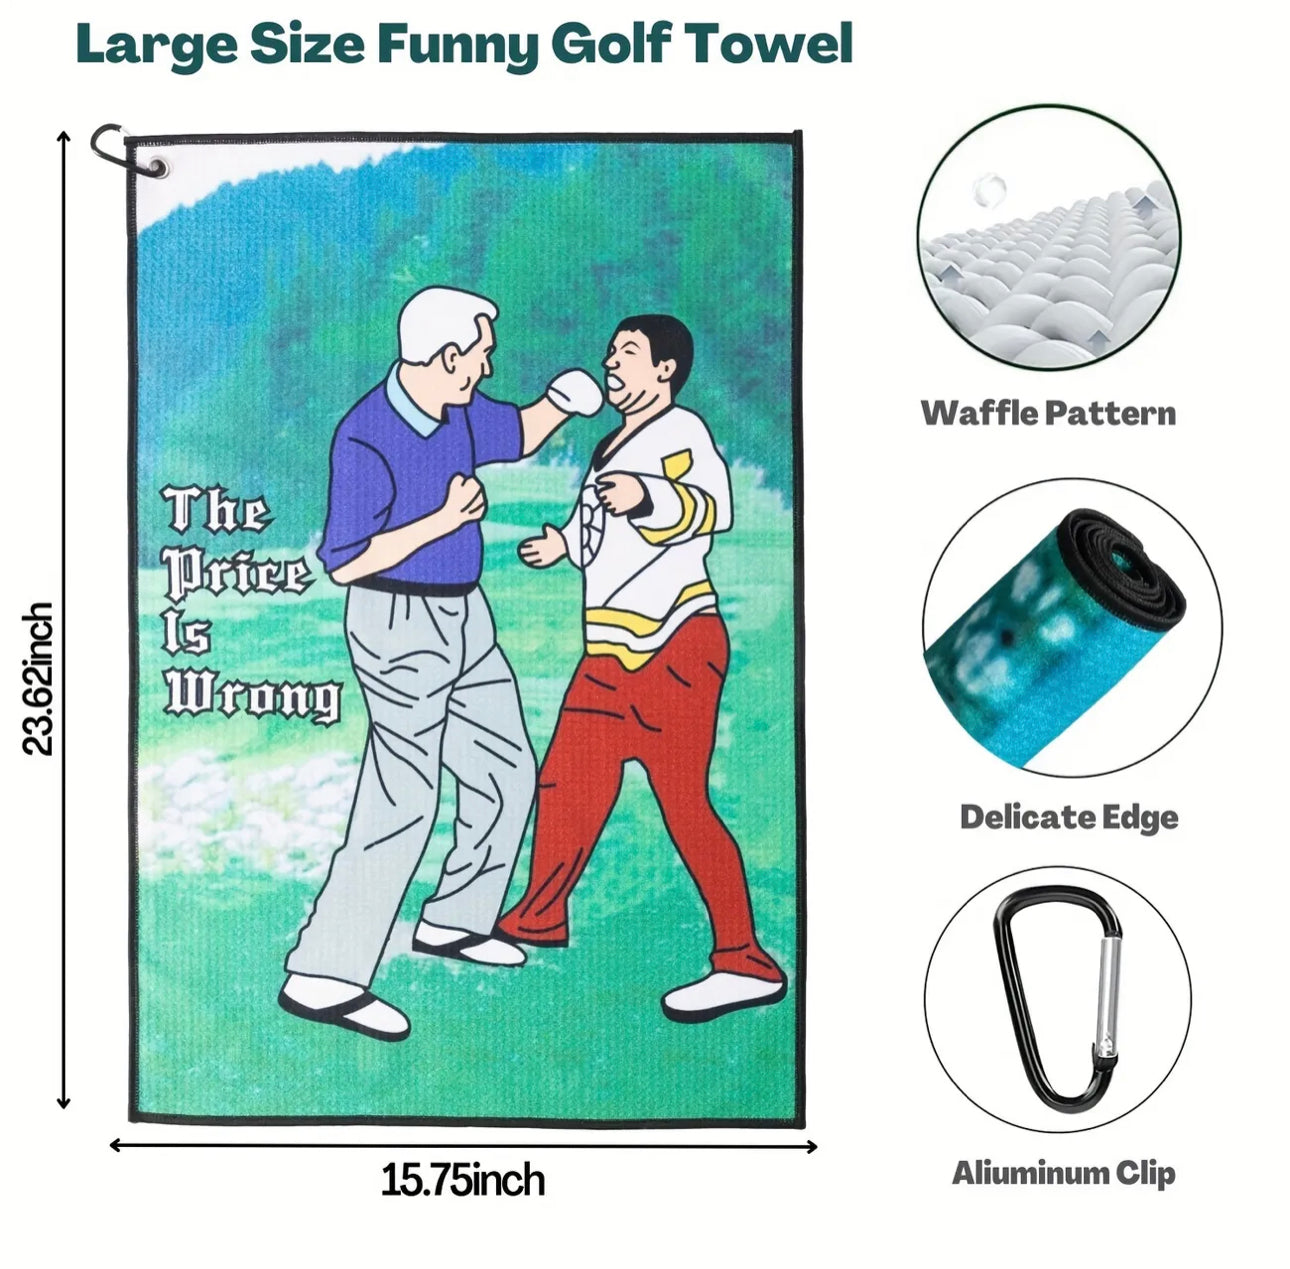 1pc Portable Soft Absorbent Golf Towel With Clip For Men And Women Golf Lovers, Embroidered Golf Towels For Golf Bags, Gifts For Friends For Family